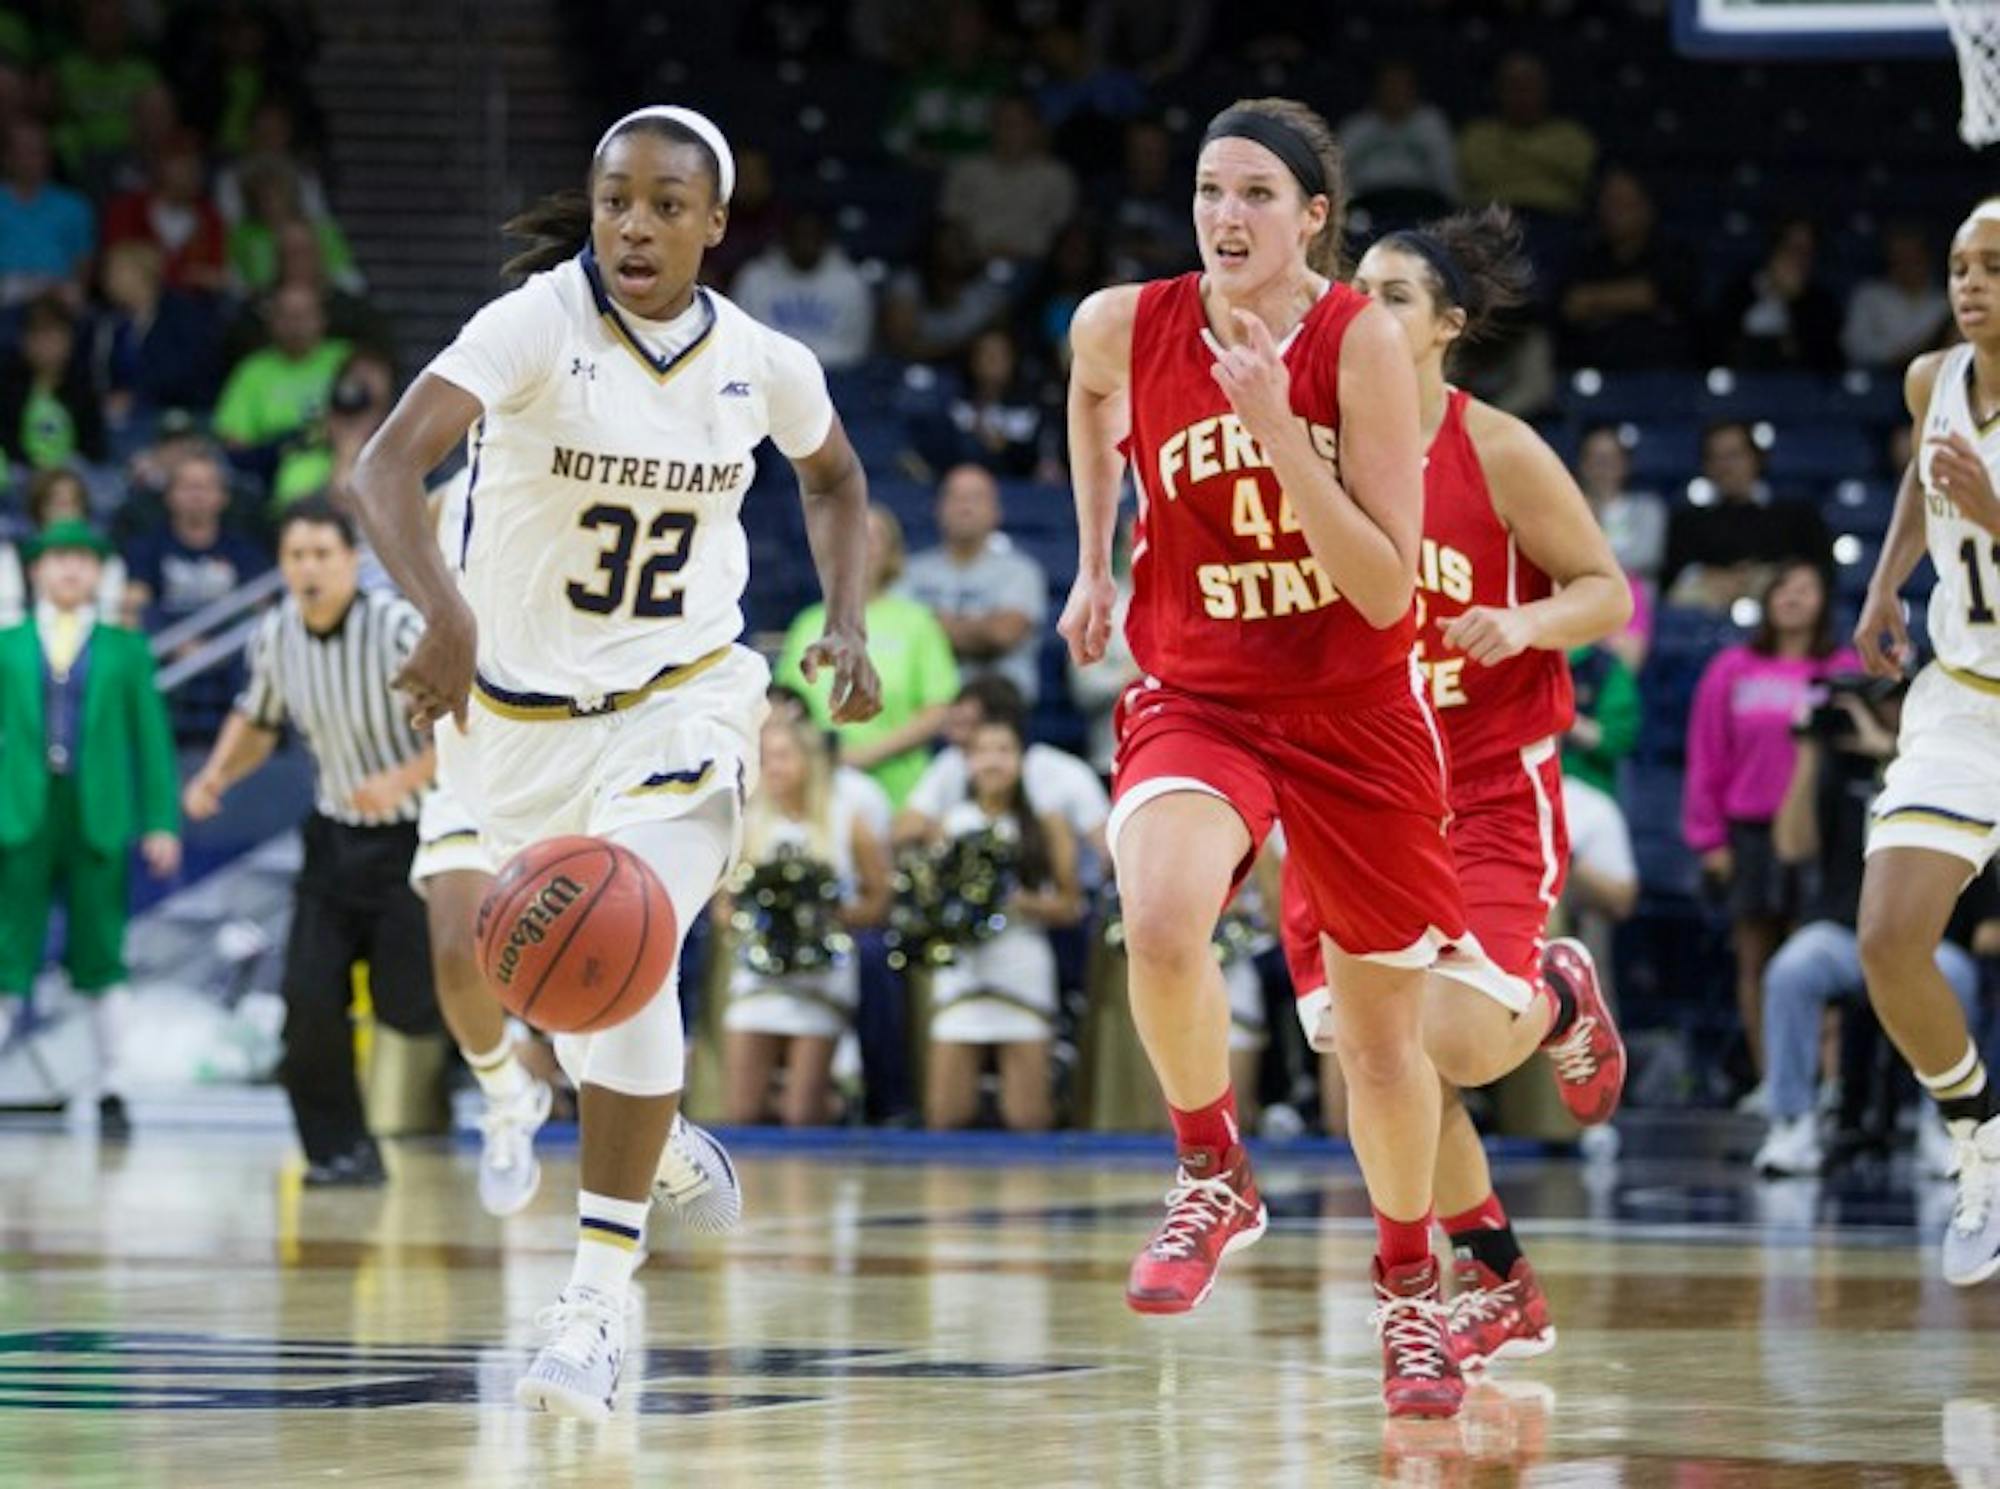 Notre Dame junior guard Jewell Loyd dribbles the ball up the court during Notre Dame’s 92-32 exhibition victory over Ferris State at Purcell Pavilion on Nov. 5. Loyd had 11 rebounds and led all scorers with 28 points during the Irish victory over Michigan State on Wednesday.